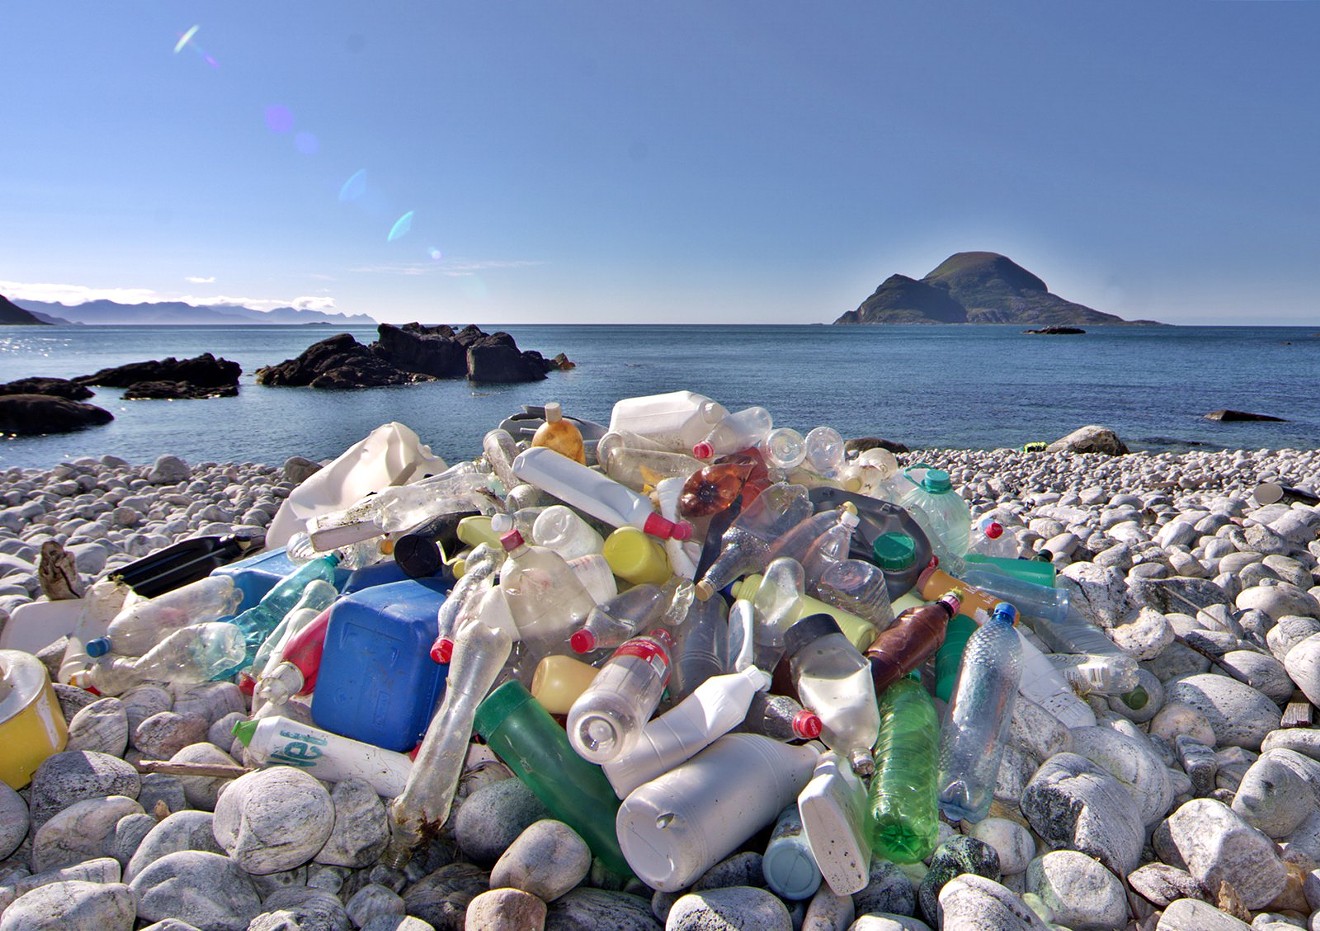 Environmentalists say single-use plastics pollute the oceans, causing damage to ecosystems.